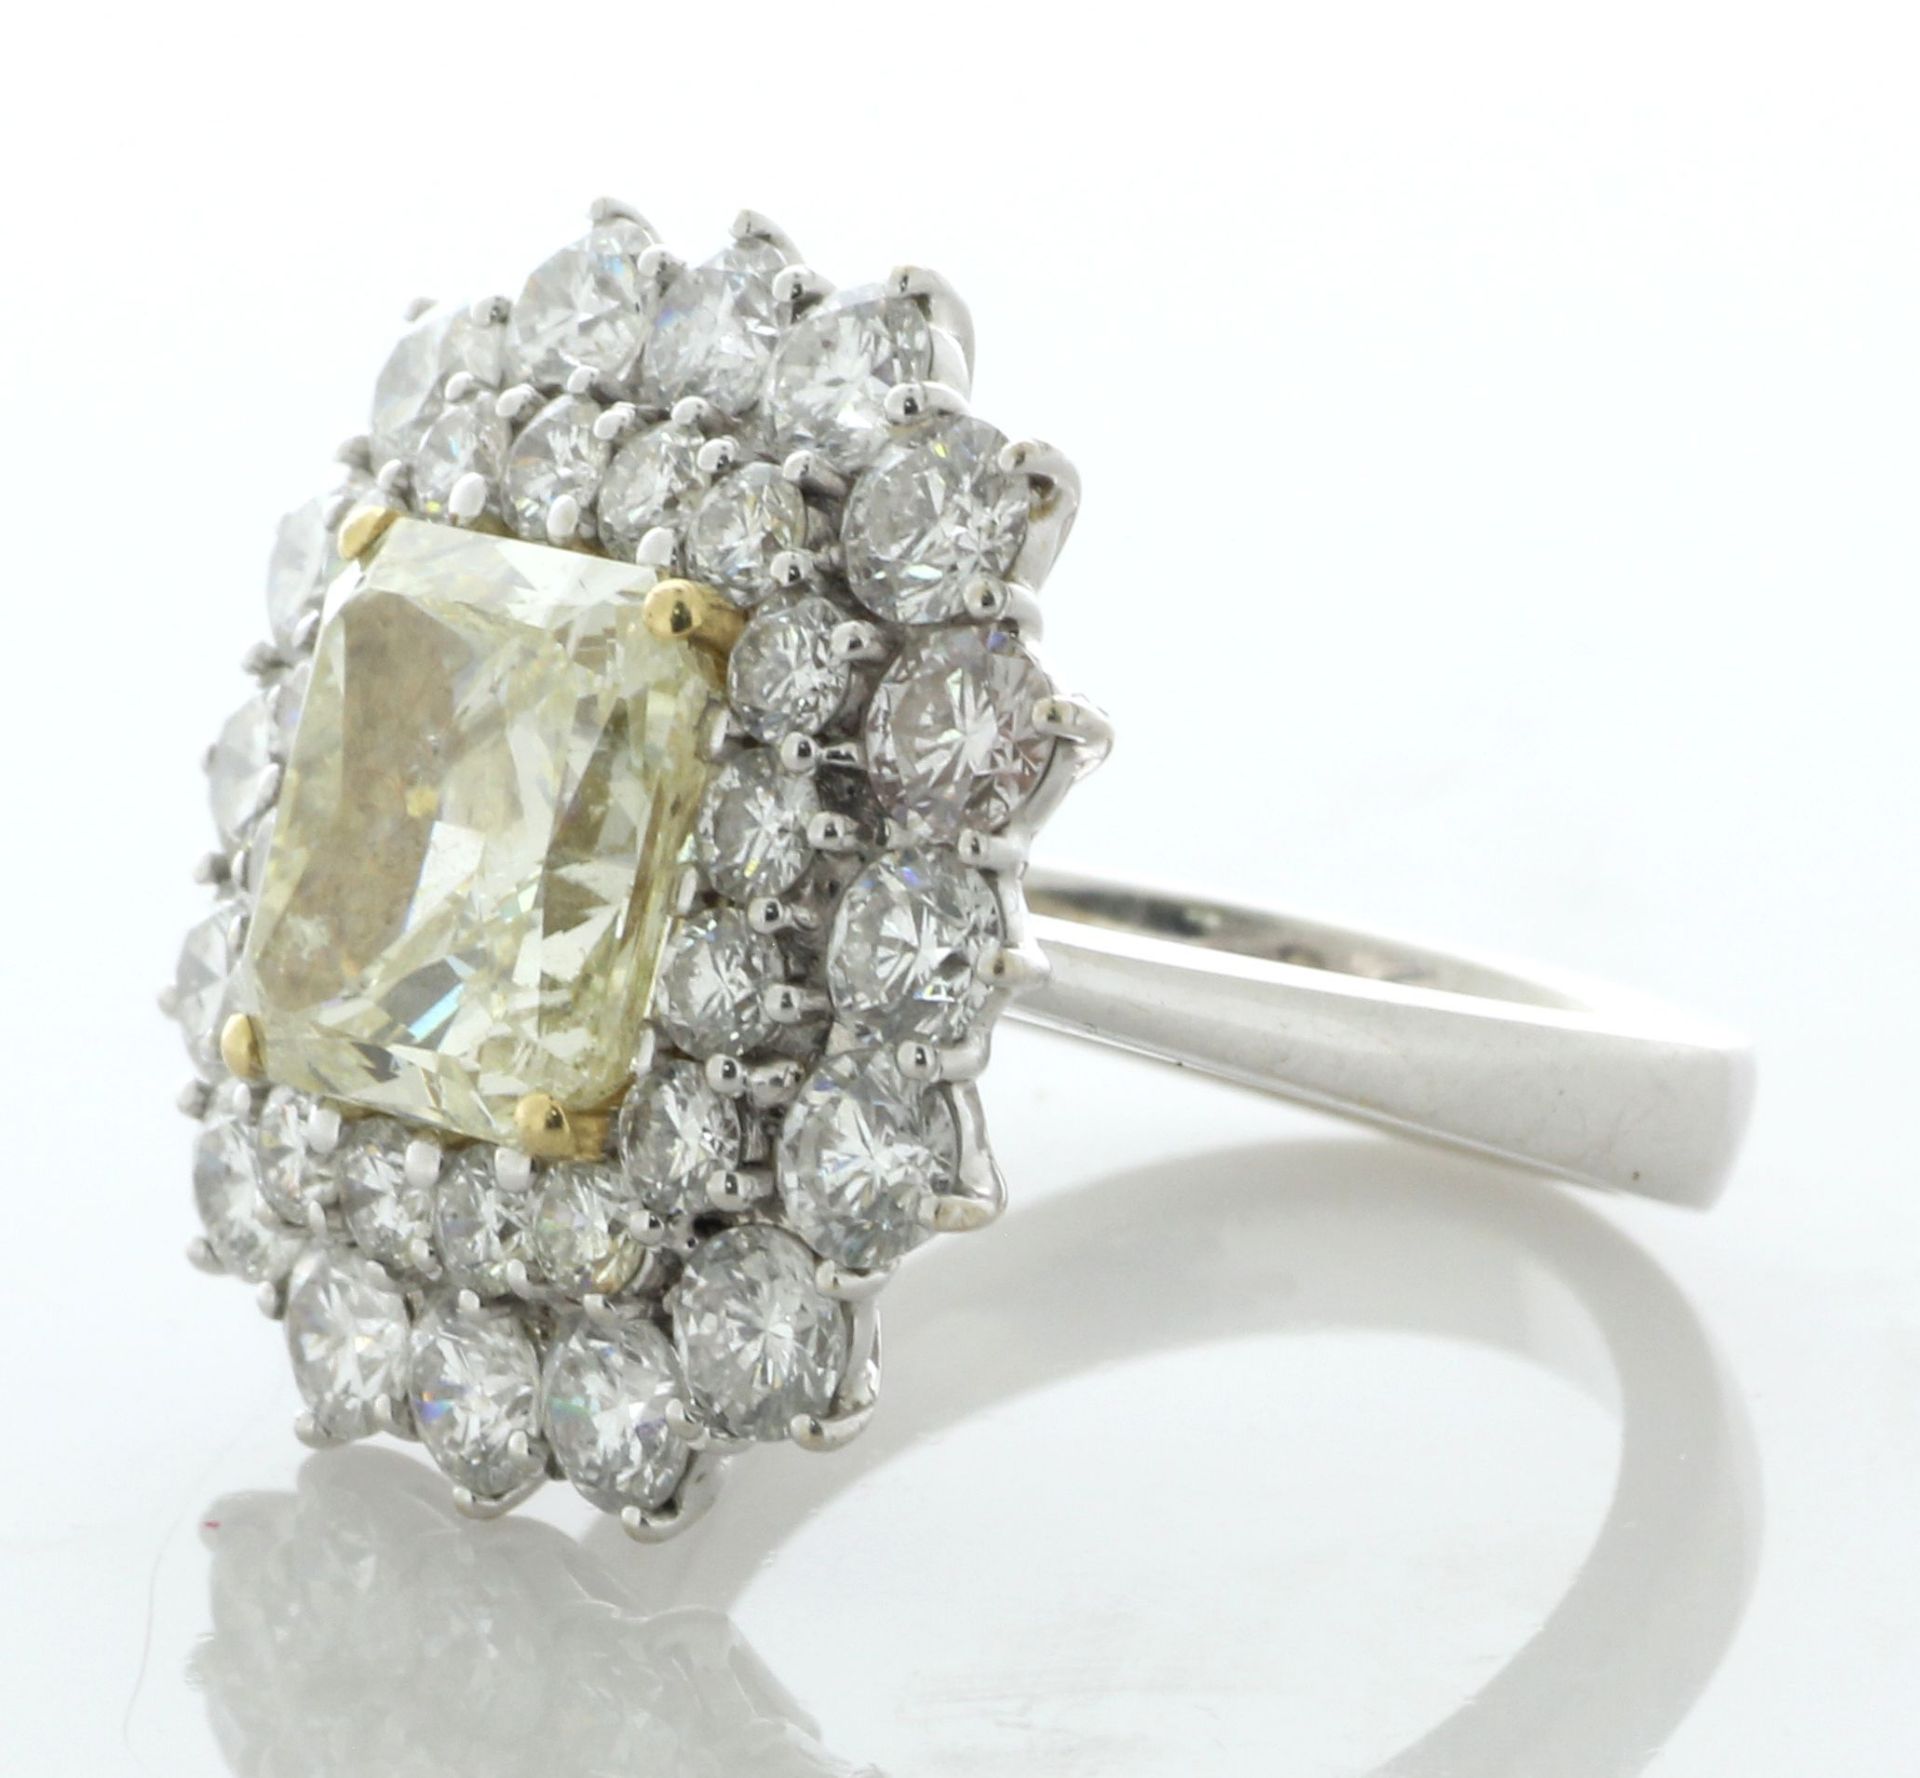 18ct White Gold Radiant Cut Fancy Cluster Diamond Ring (4.58) 2.88 Carats - Image 3 of 8